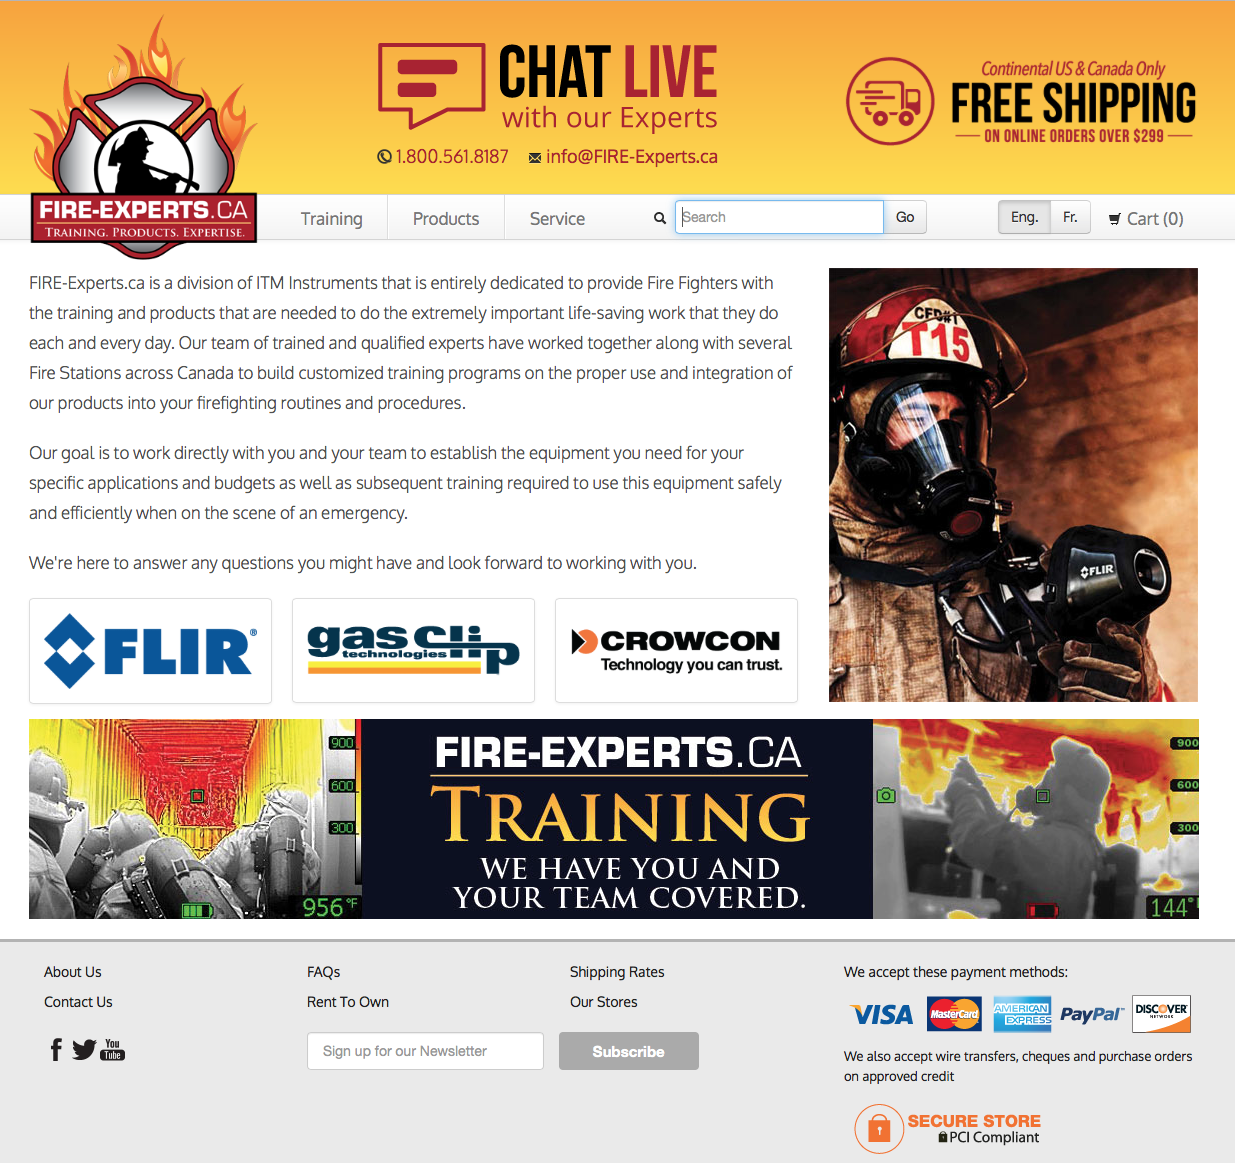 FIRE-Experts.ca - Training, Products & Expertise specifically for Fire Fighters.